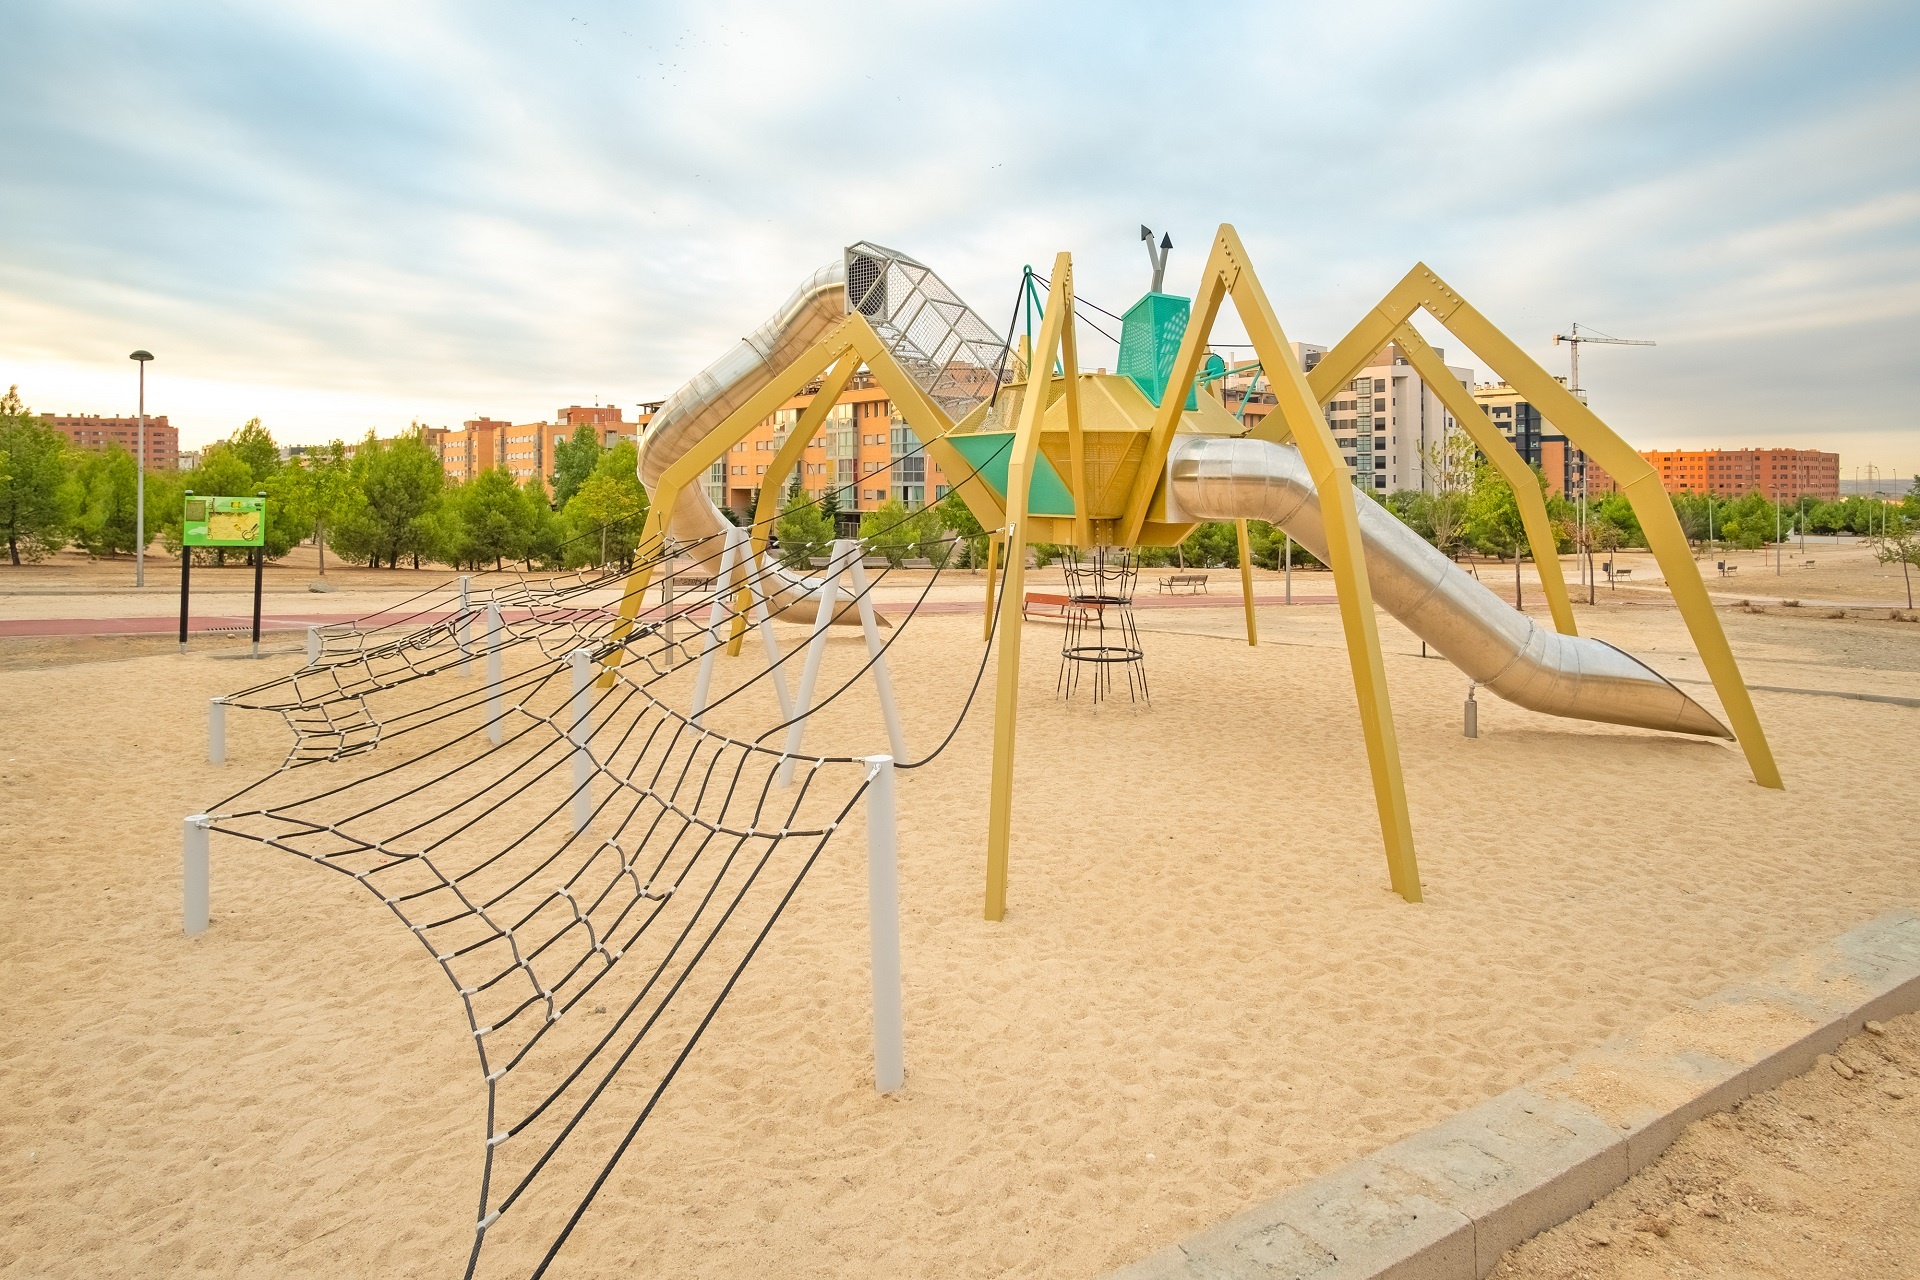 Wood vs. Metal Playgrounds - Which to Choose?